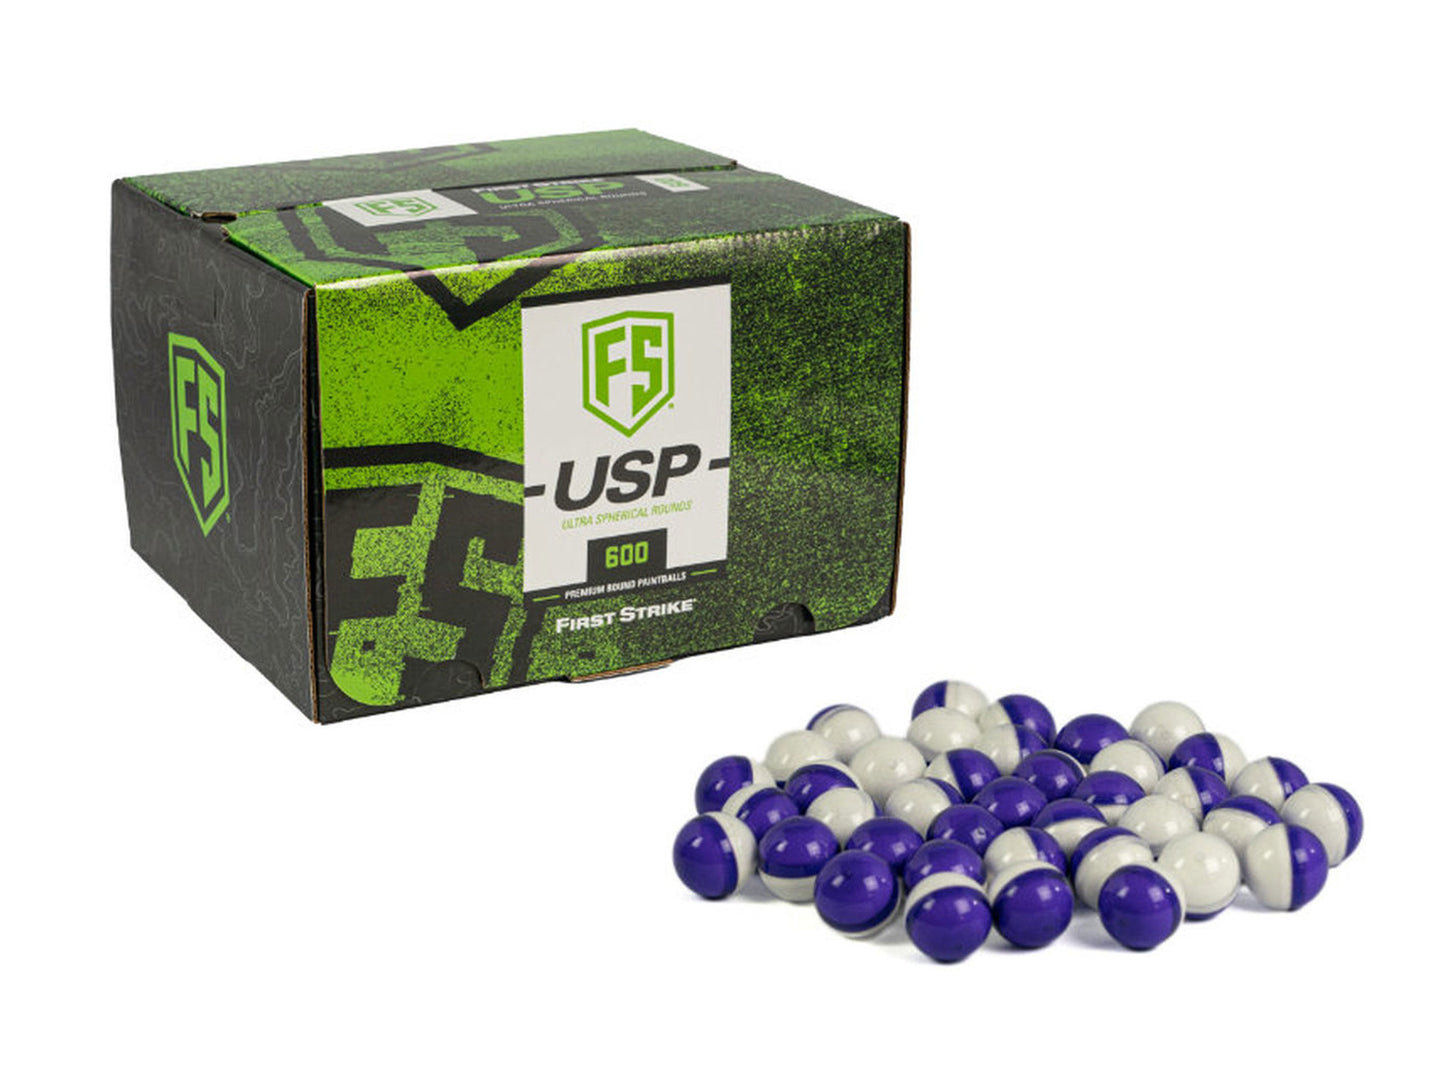 First Strike USP Rounds - 600 Count - Ultra Spherical Projectiles - First Strike